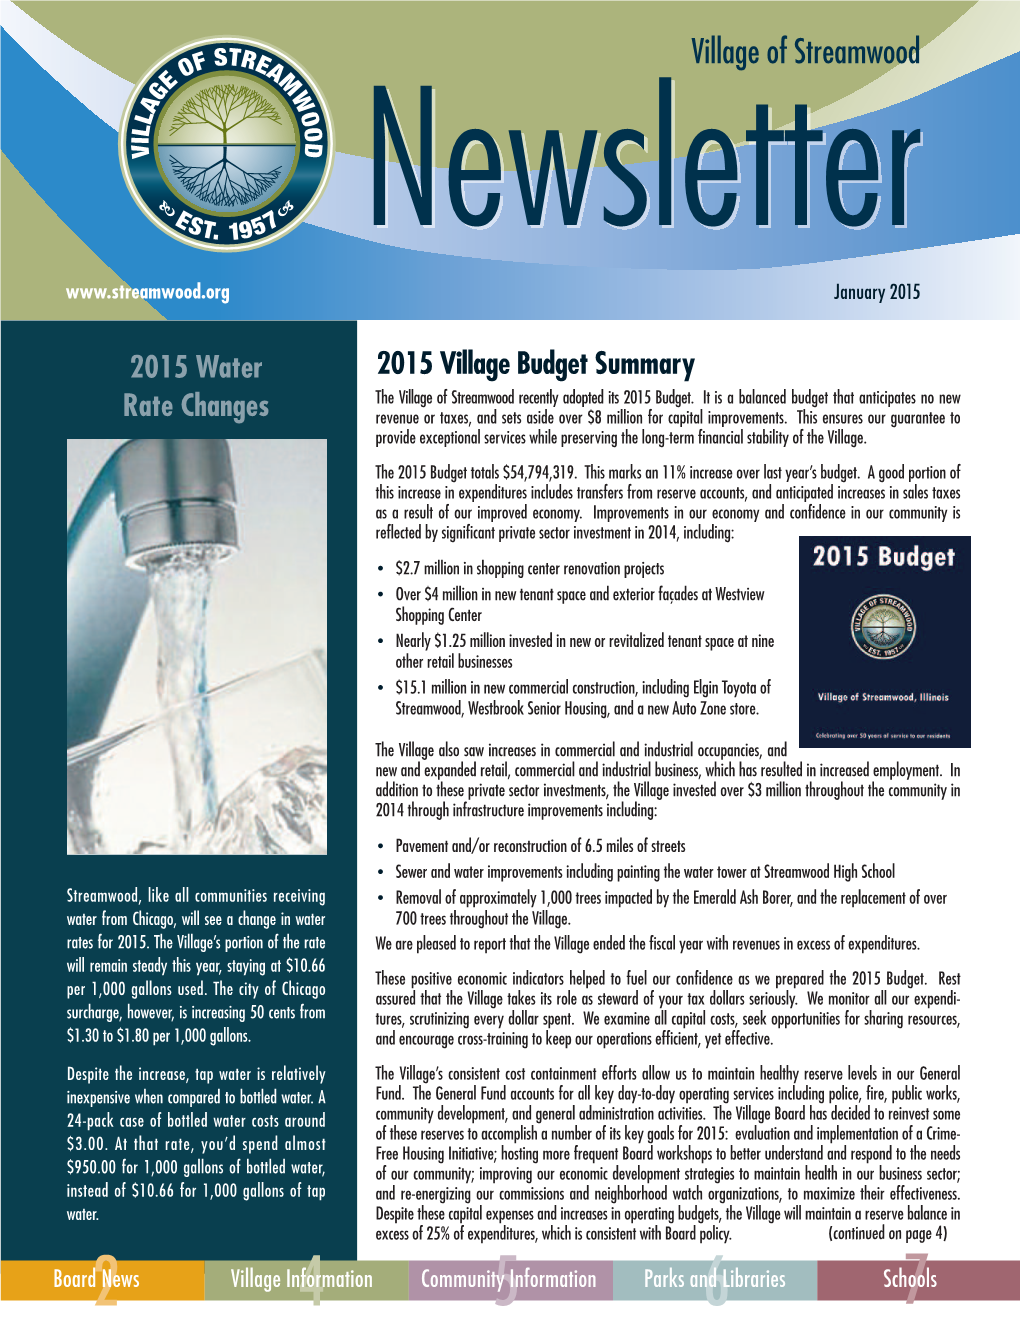 2015 Village Budget Summary 2015 Water Rate Changes